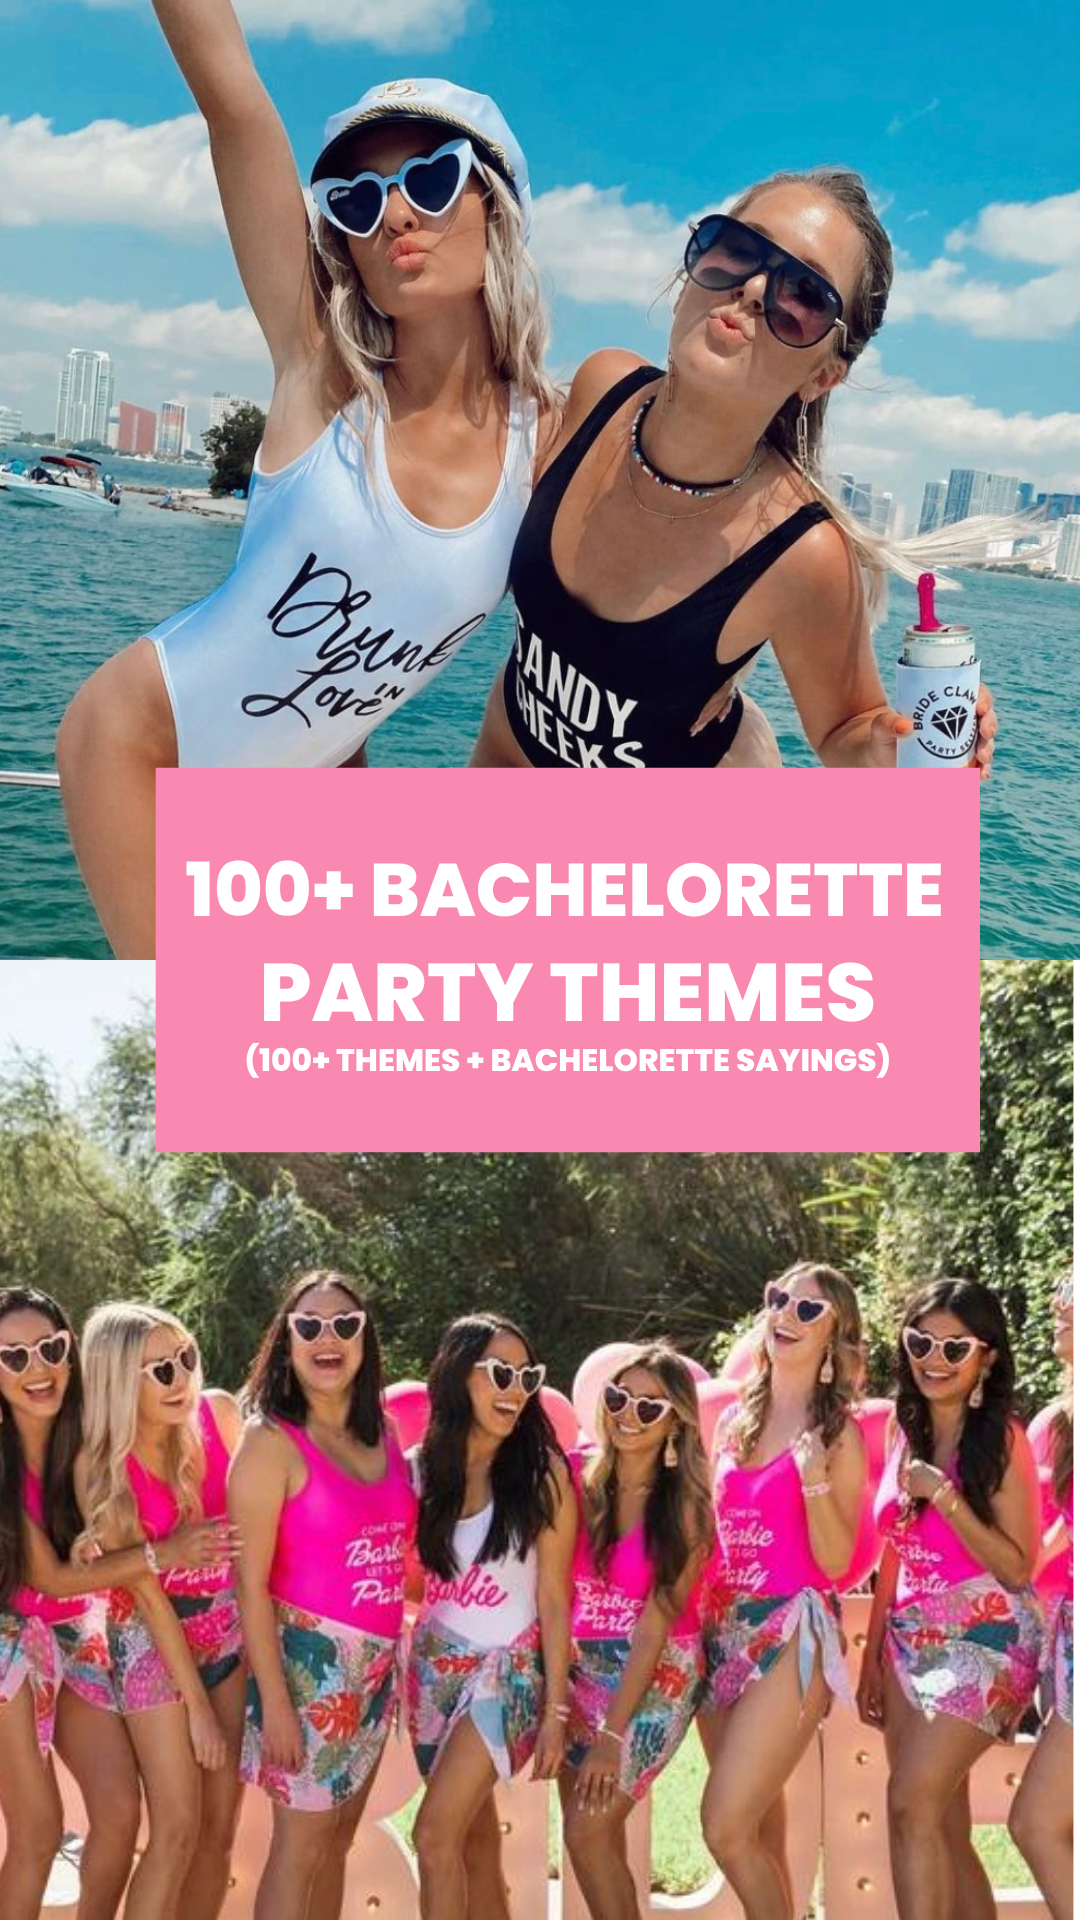 9 Bachelorette Party Sunglasses of All Shapes and Styles